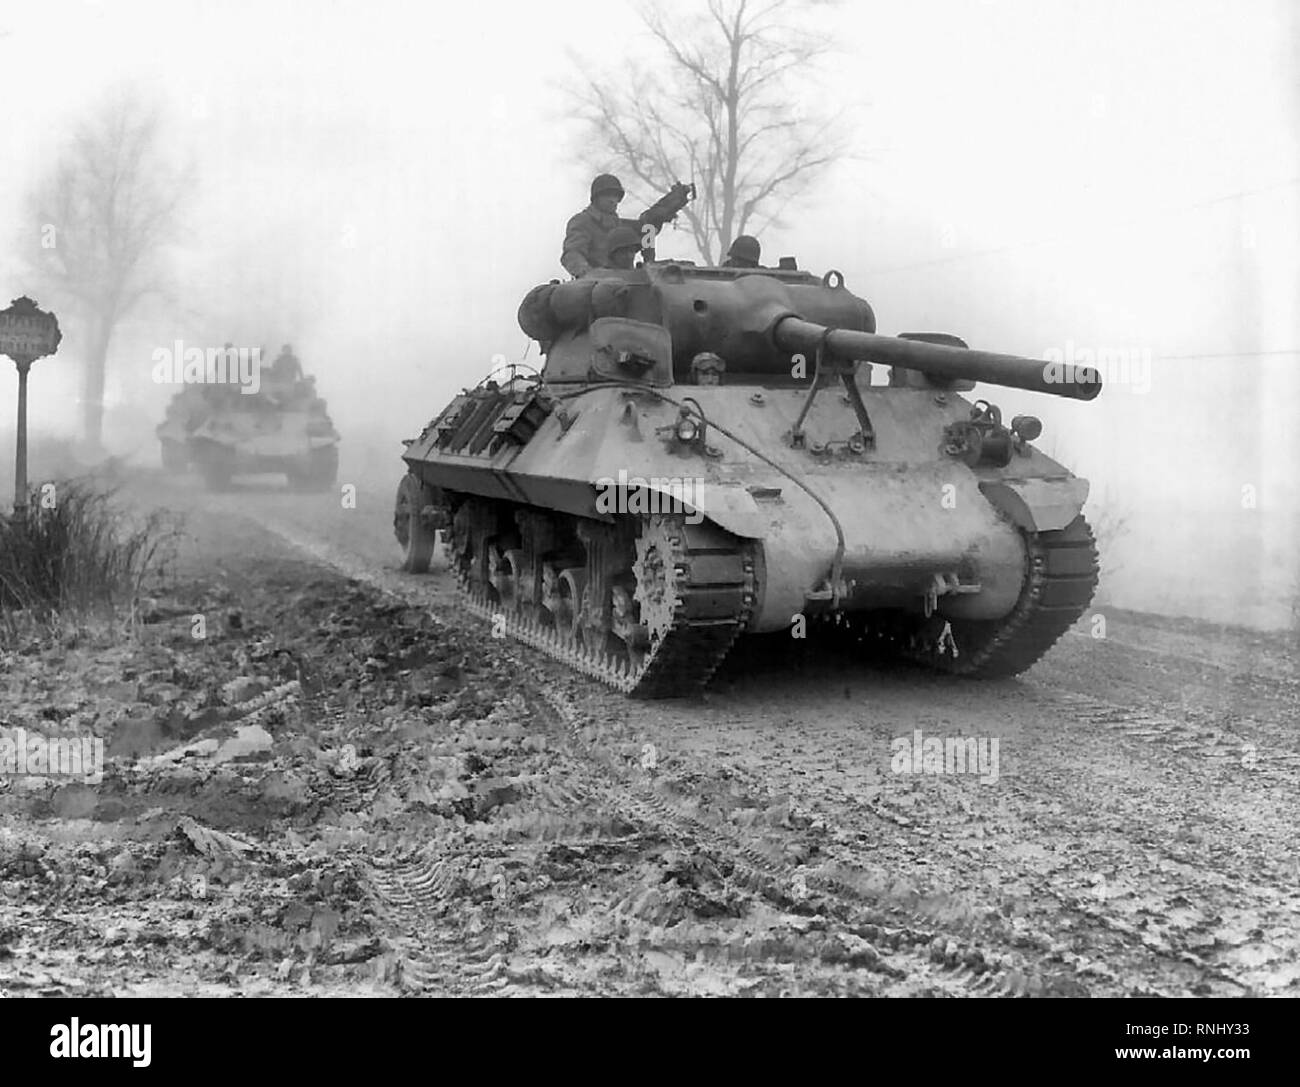 Battle of the Bulge - American tank destroyers move forward during heavy fog to stem German spearhead near Werbomont, Belgium, 20 Dec 44. Werbomont, 703rd TD, 82nd Airborne Division Stock Photo